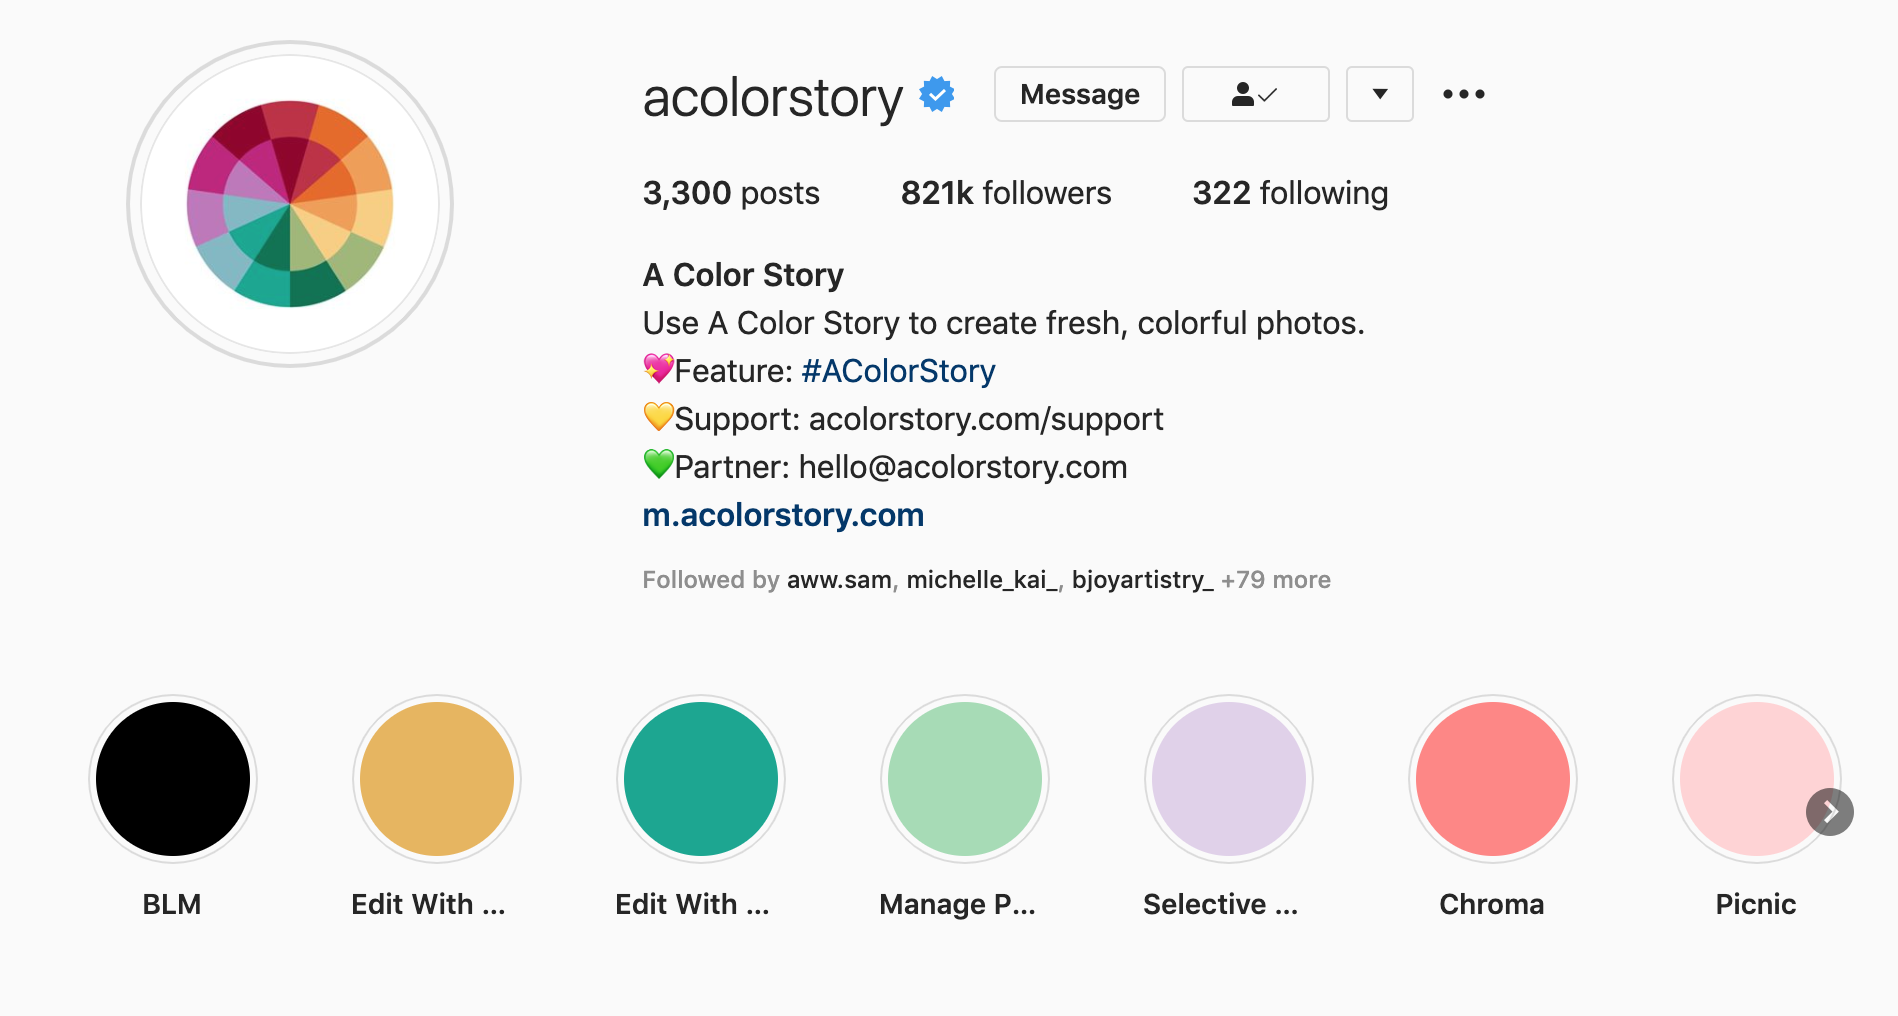 brand community - a color story hashtag